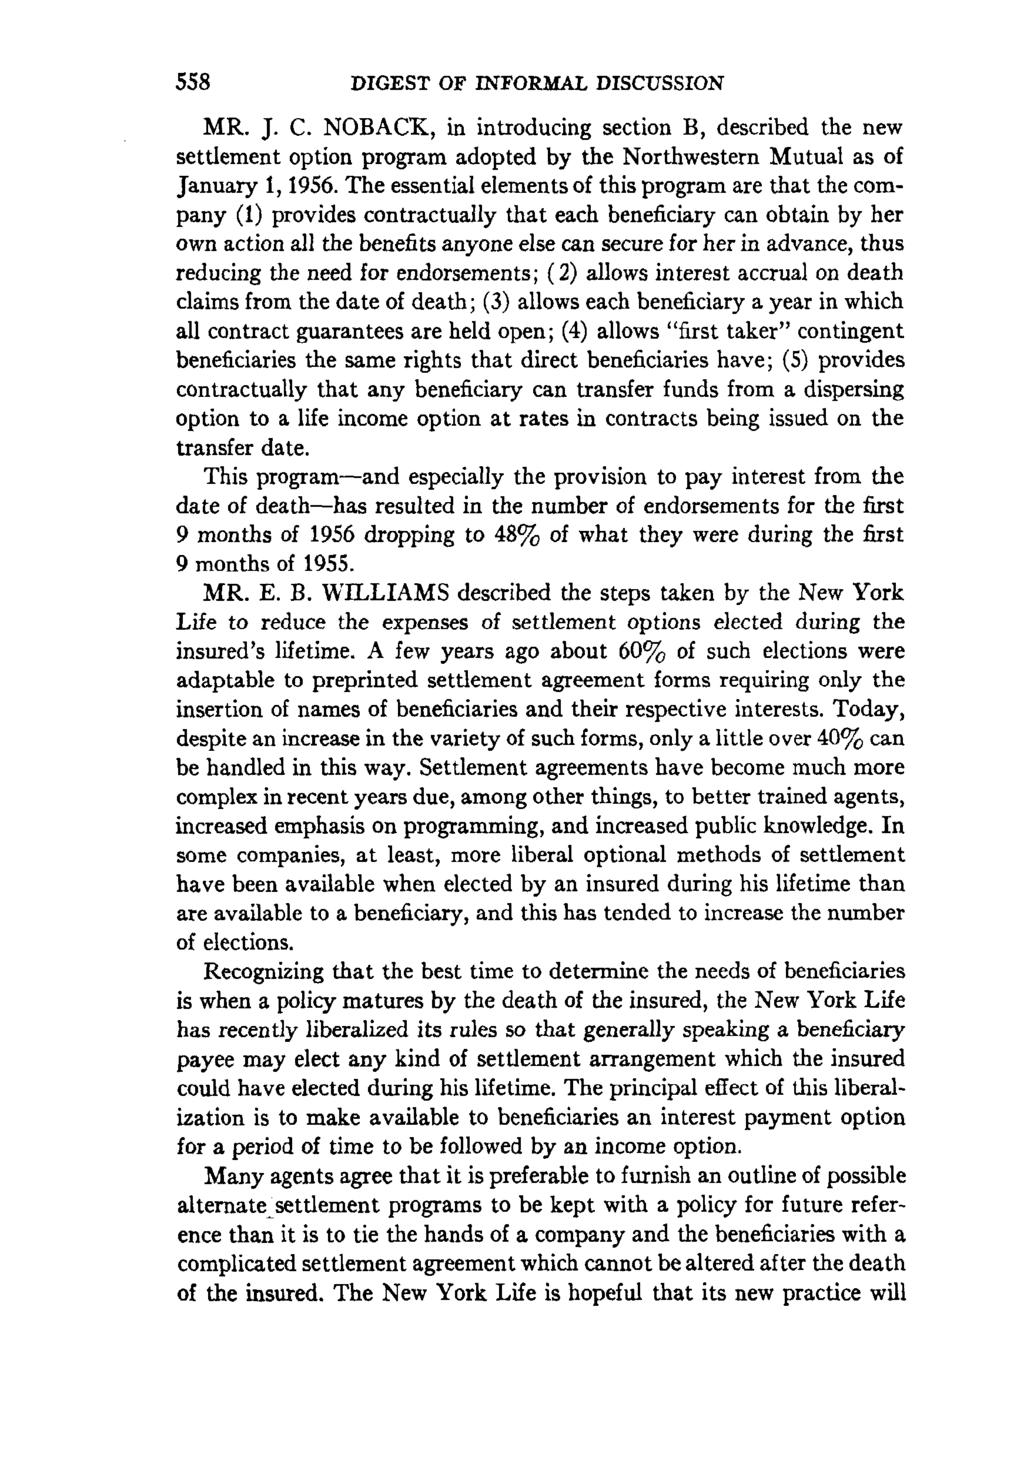 558 DIGEST OF INFORMAL DISCUSSION MR. J. c. NOBAC~K, in introducing section B, described the new settlement option program adopted by the Northwestern Mutual as of January I, 1956.